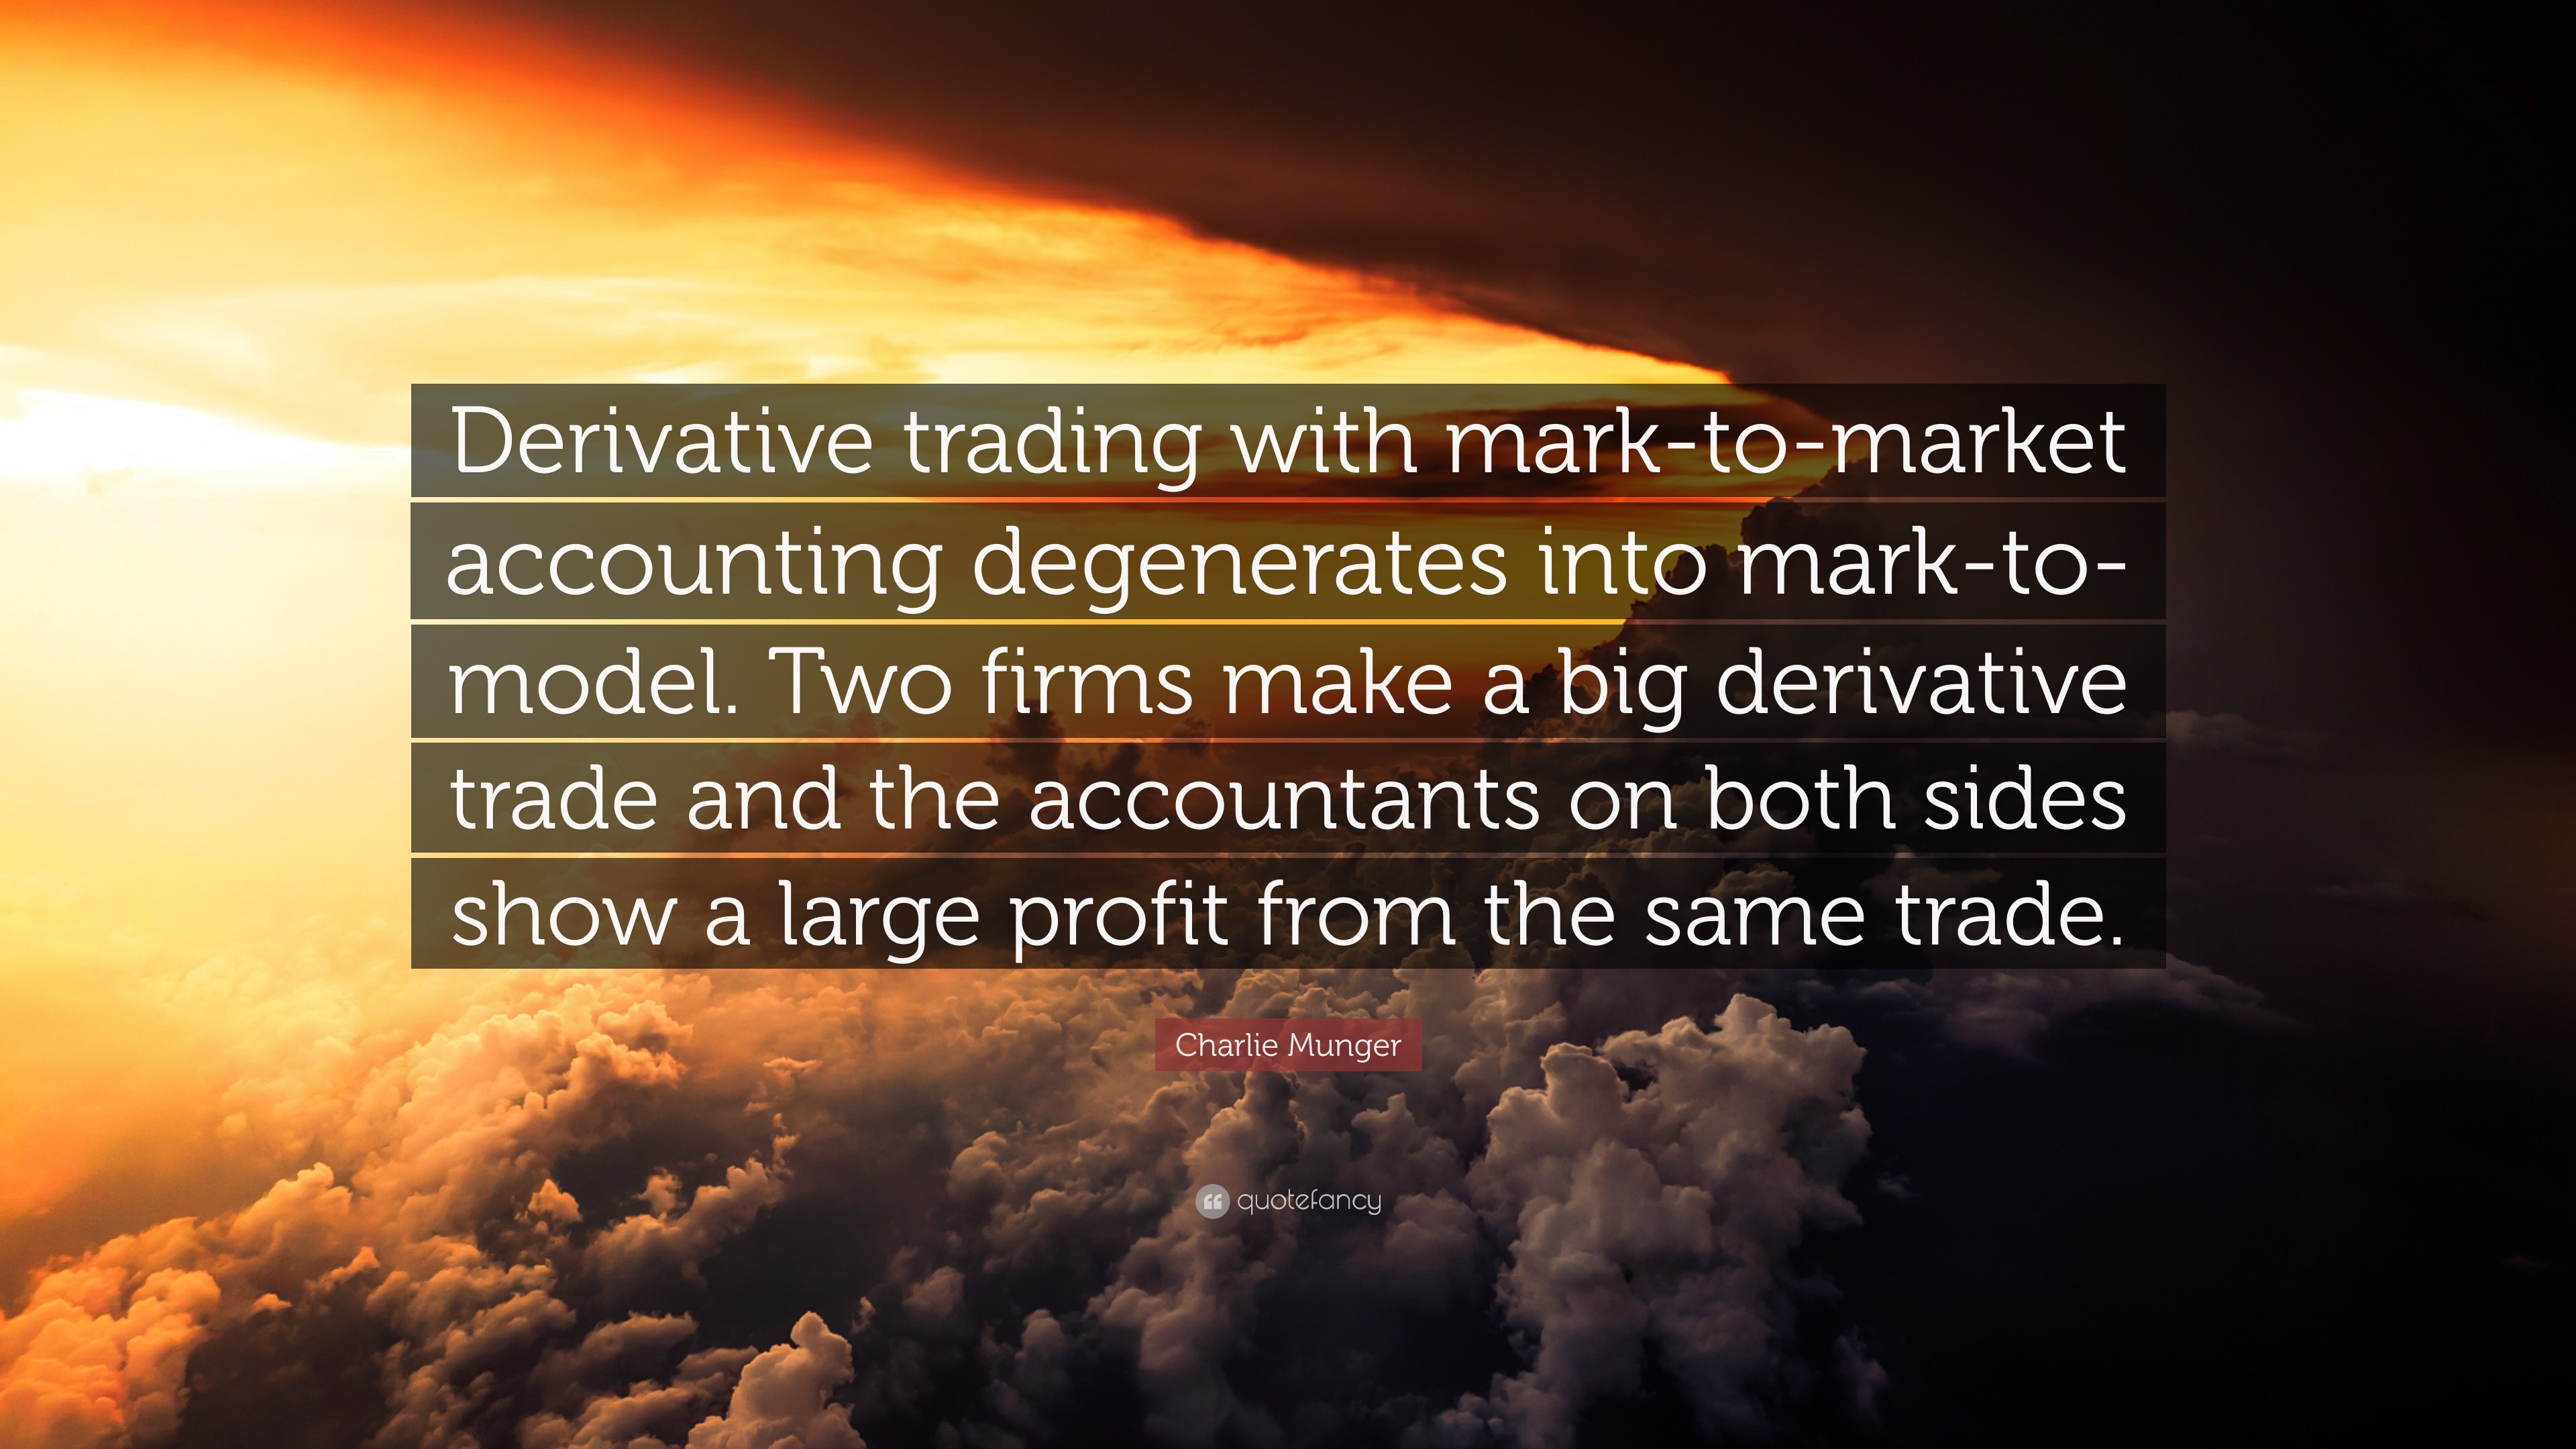 futures trading mark to market accounting